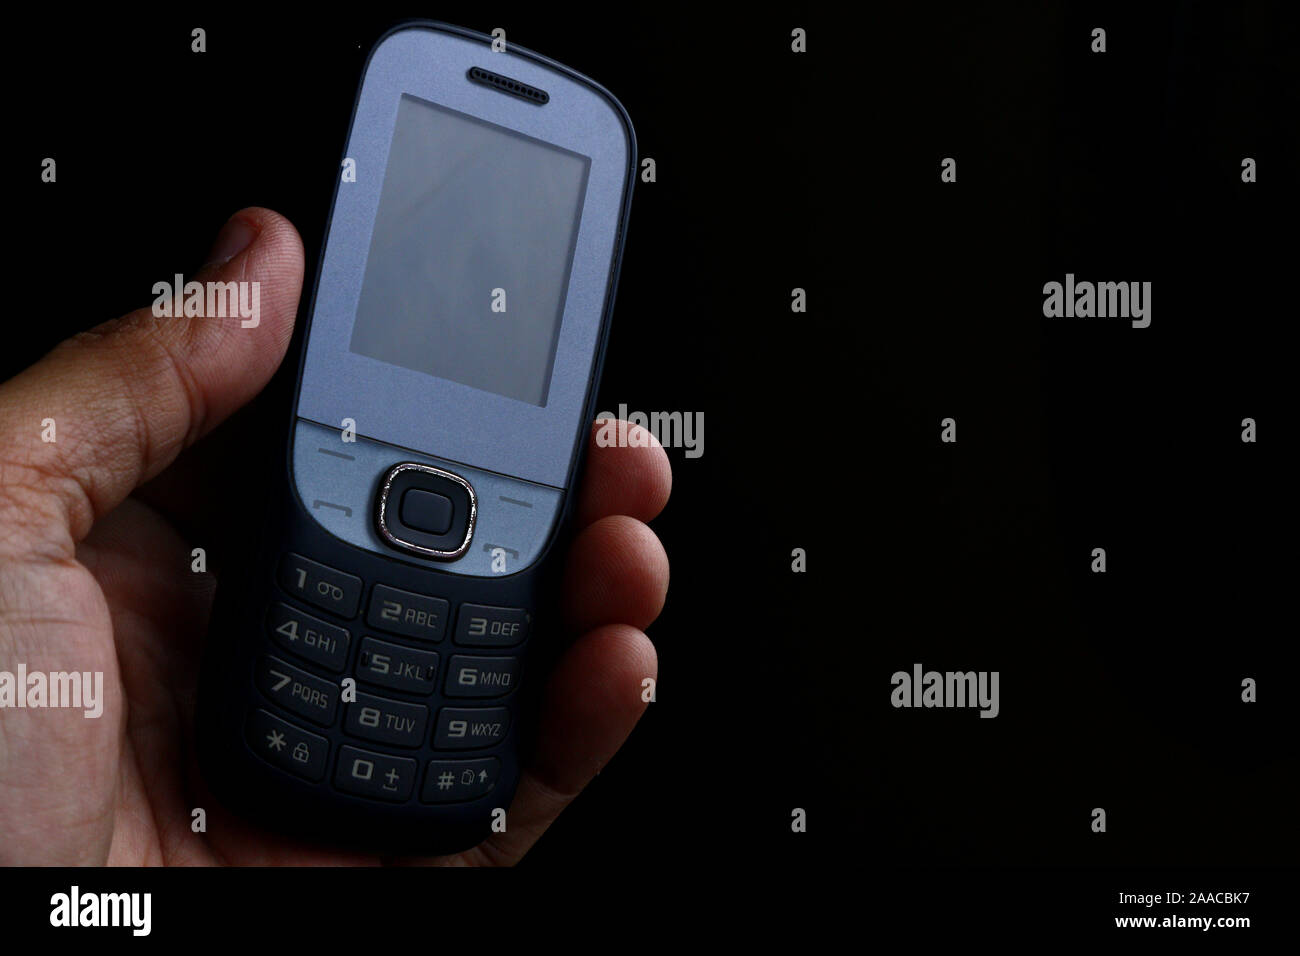 Photo of old and used mobile phone with keypad. Stock Photo